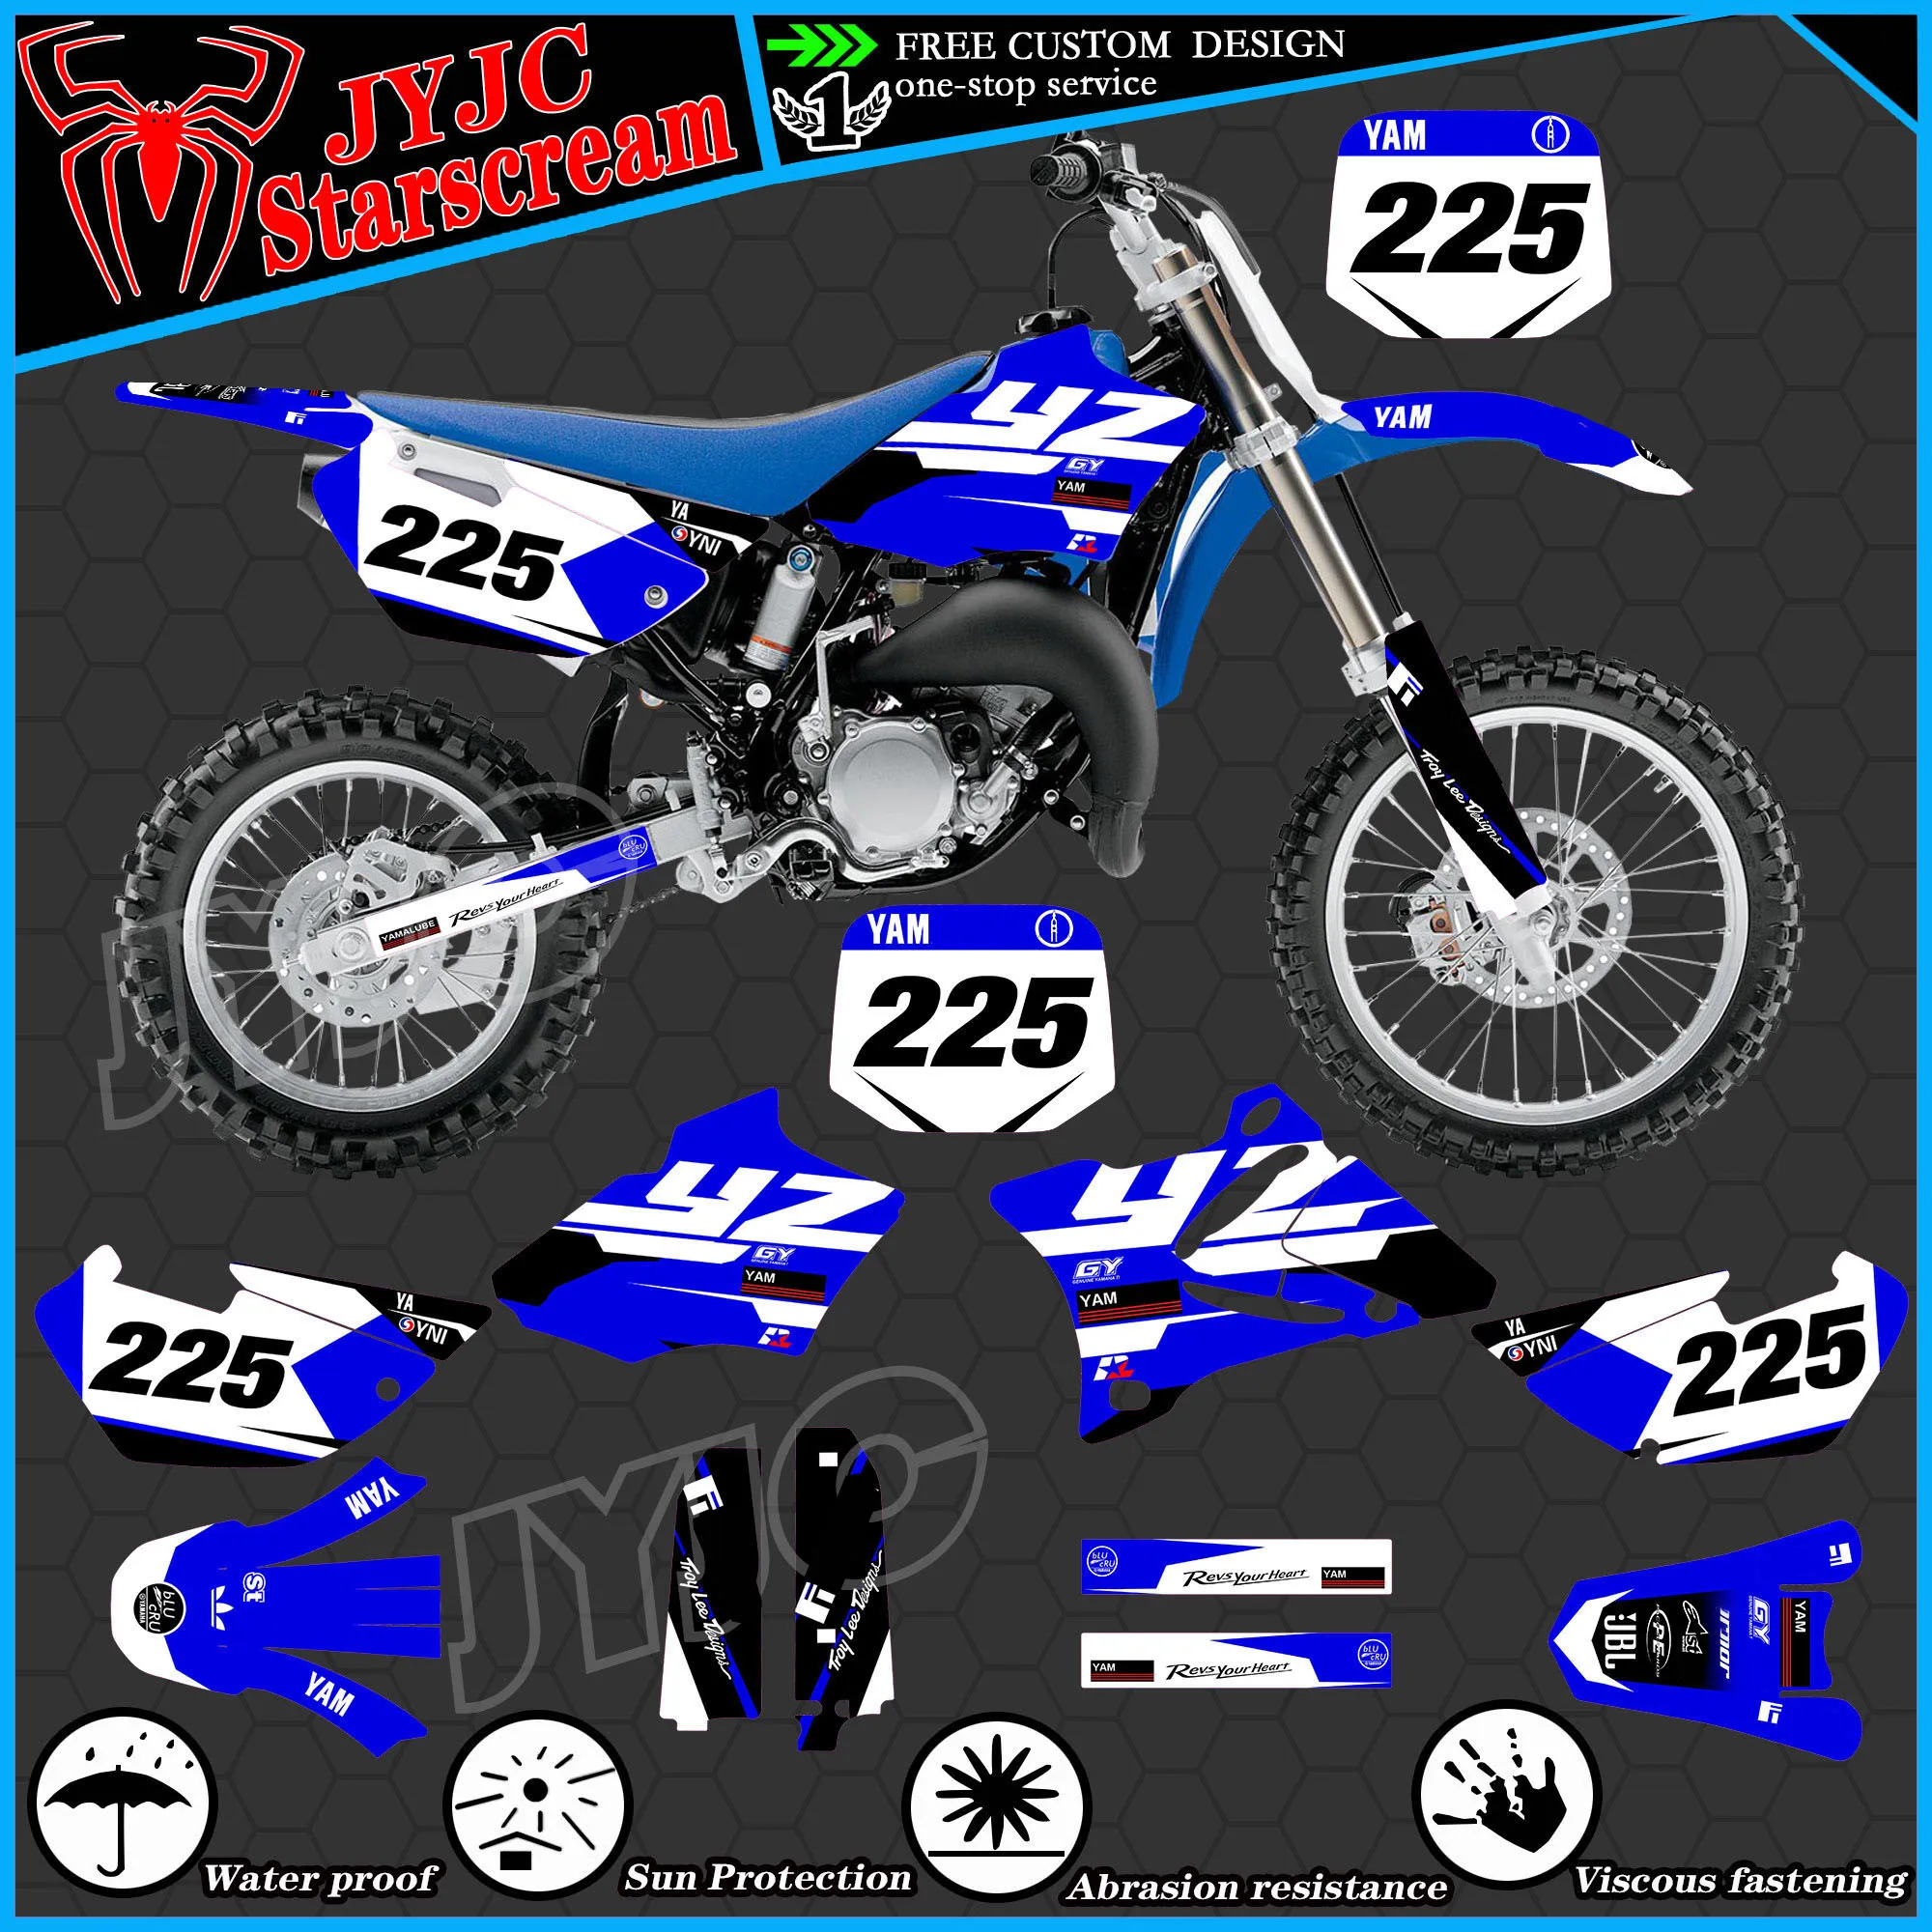 Graphic Kit for YAMAHA 2002 2003 2004 2005 2006 2007 2008 2009 2010 2011 2012 2013 2014 YZ85 Motorcycle Decal Stickers dsmtech motocross graphics decals stickers deco for yamaha yz85 yz 85 2002 2014 2013 2012 2011 2010 2009 2008 2007 2006motocross